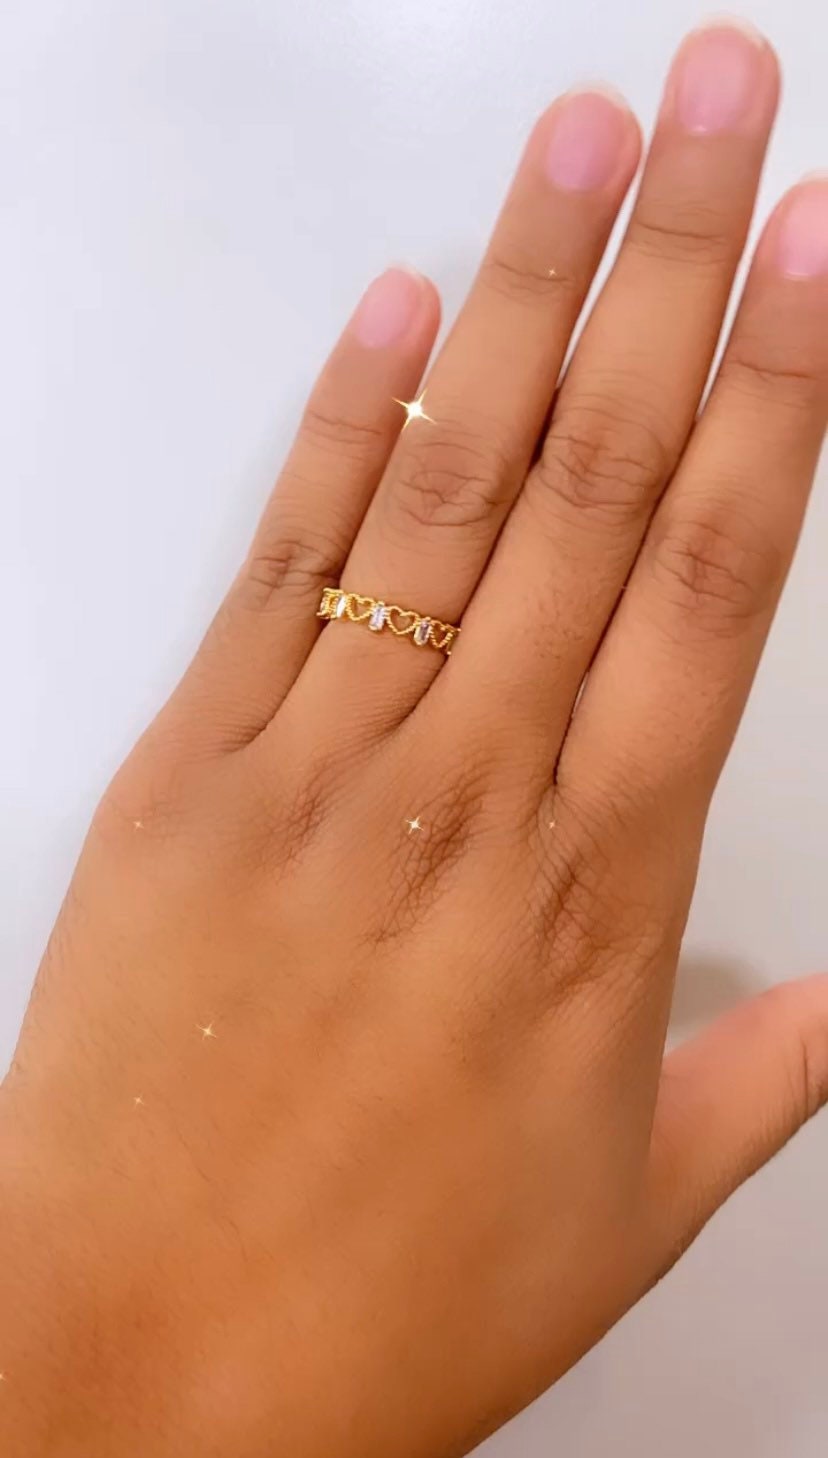 Dainty Heart CZ Ring, Gold heart ring, adjustable rings, stackable